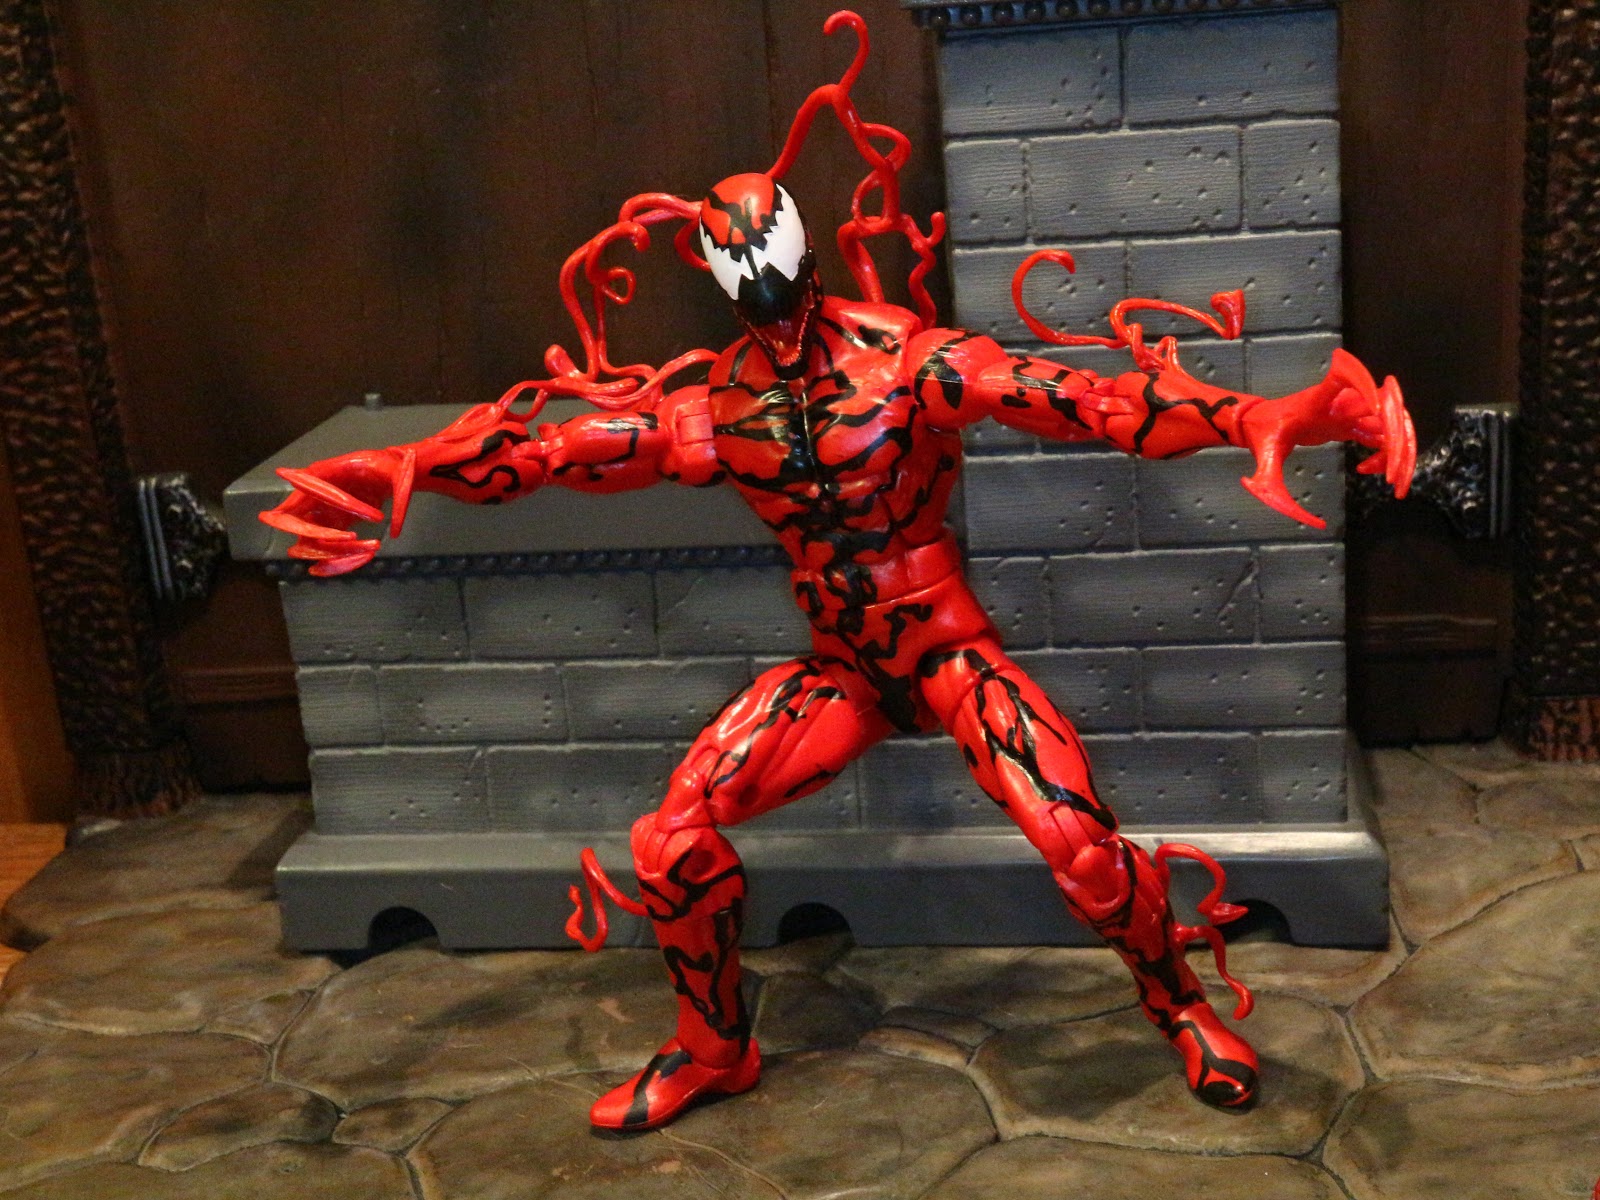 Action Figure Barbecue Action Figure Review Carnage from